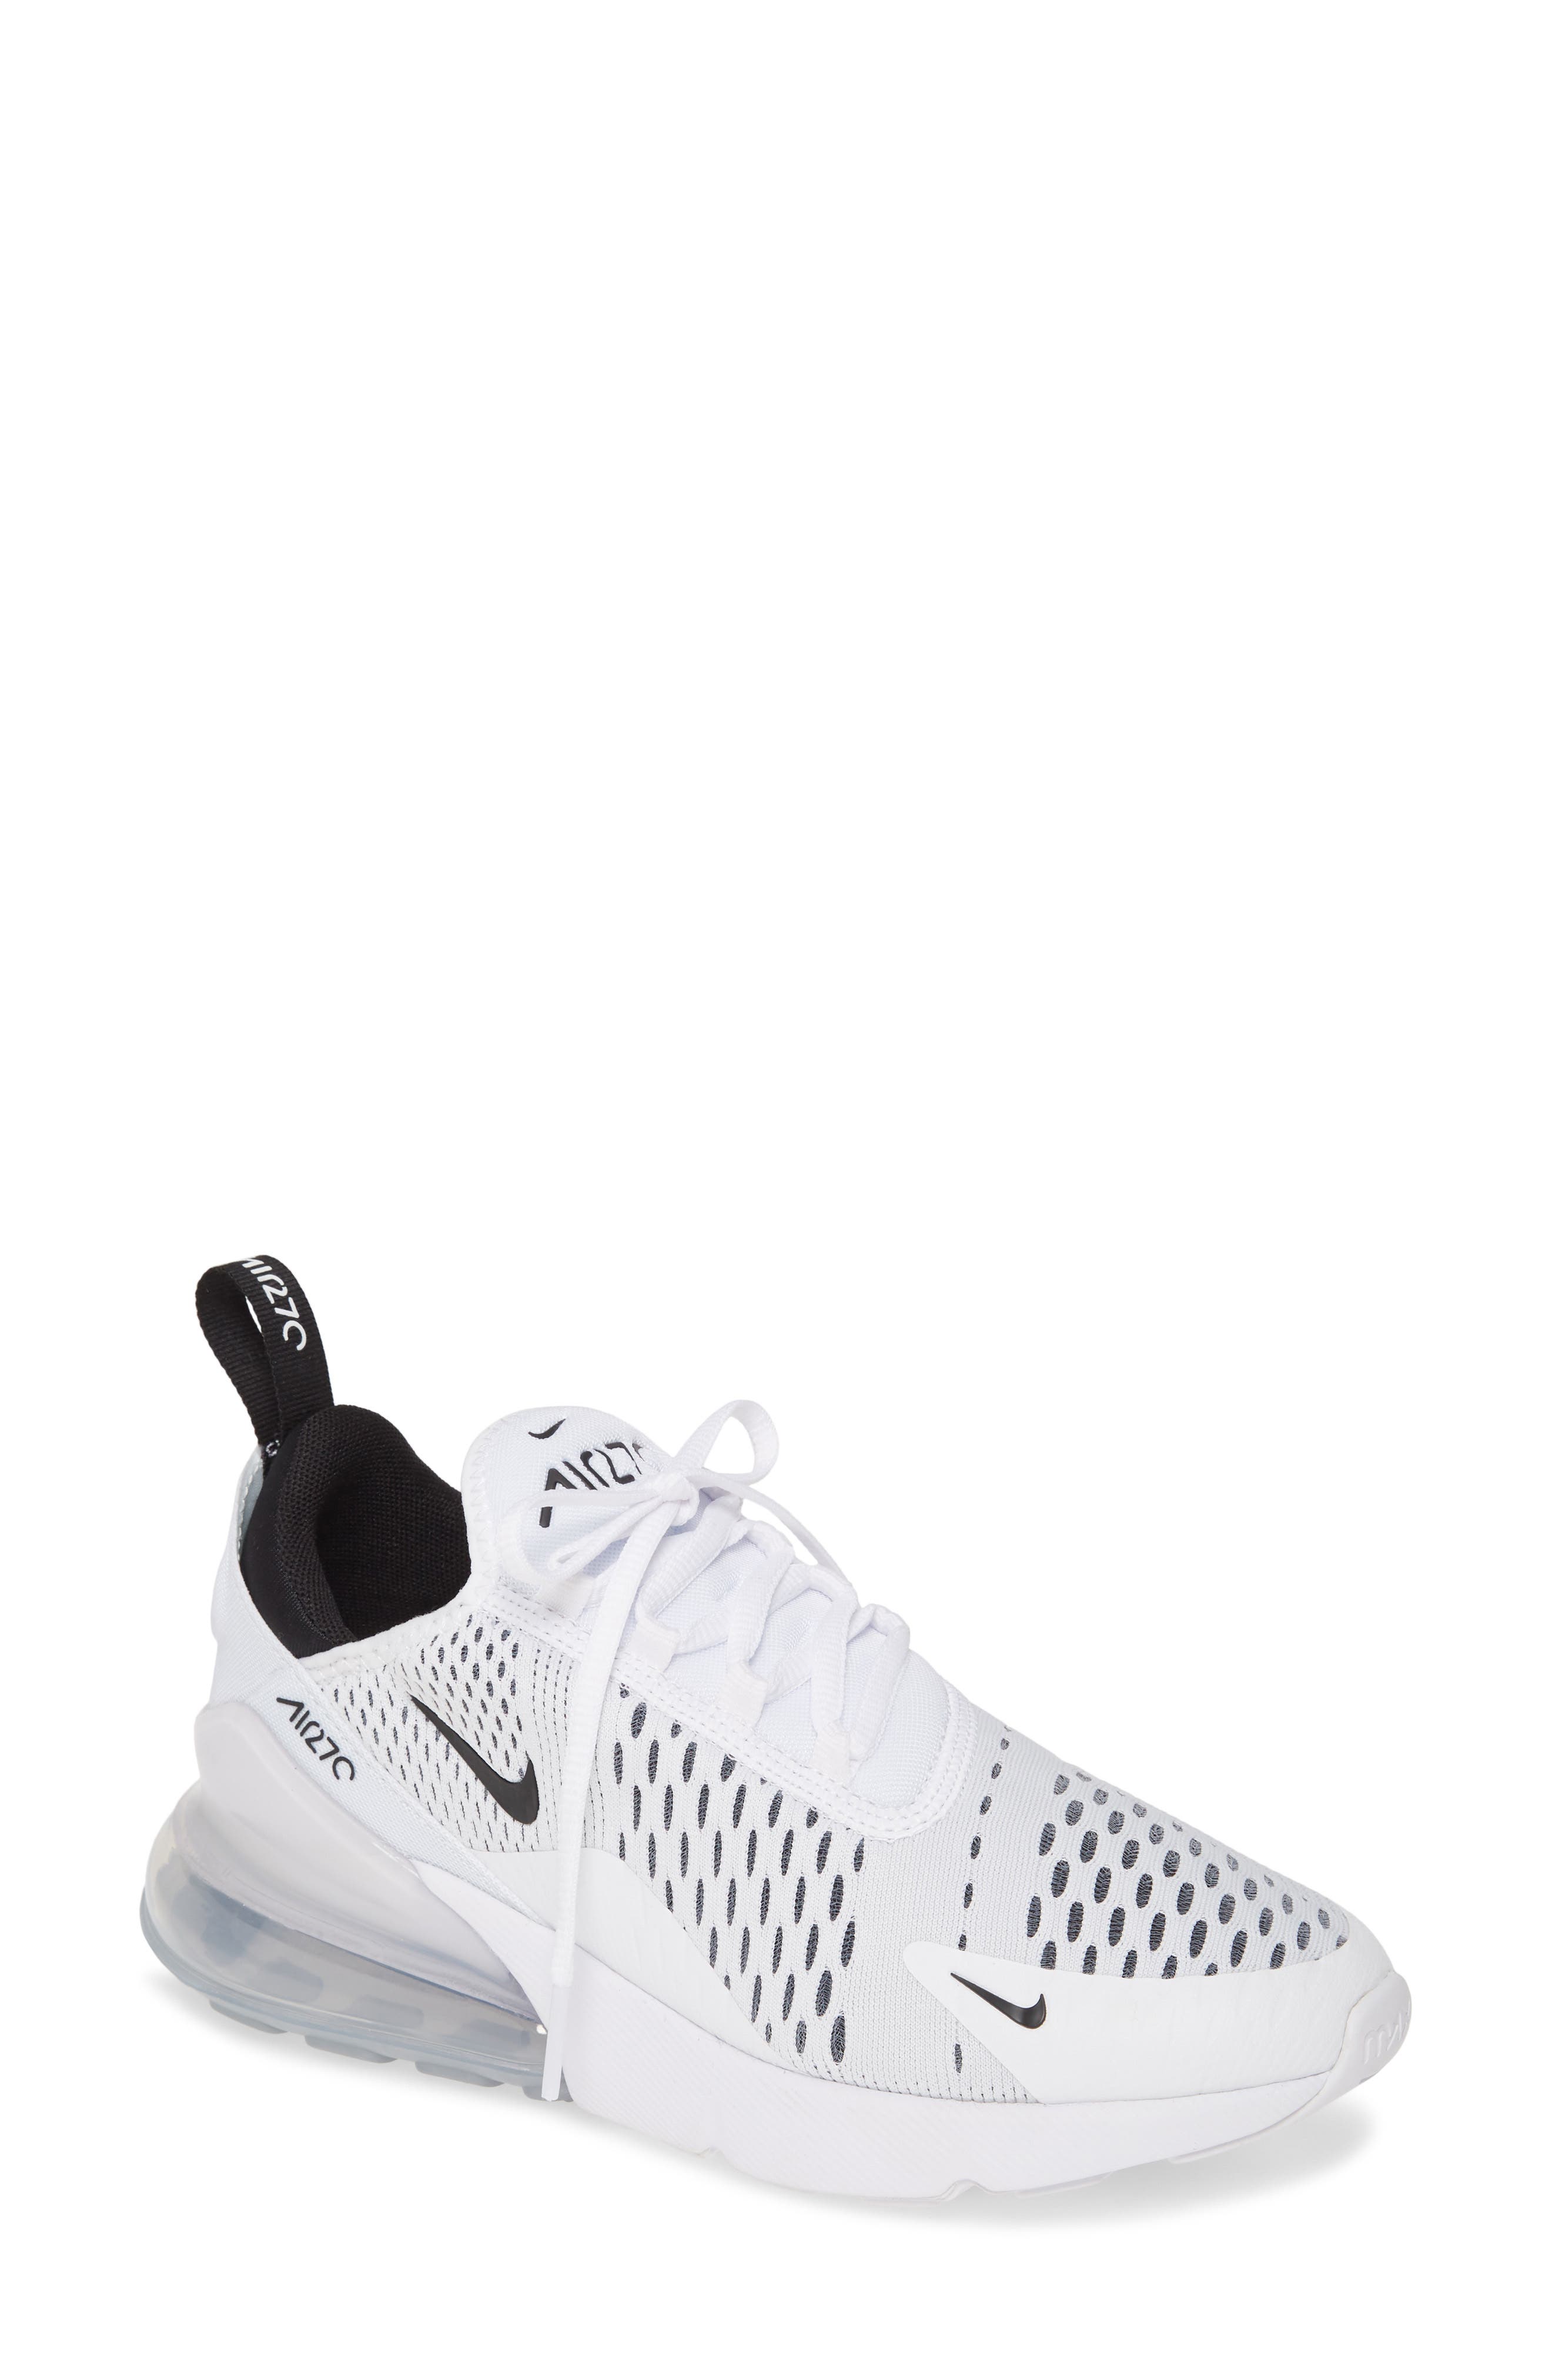 women nike shoes black and white